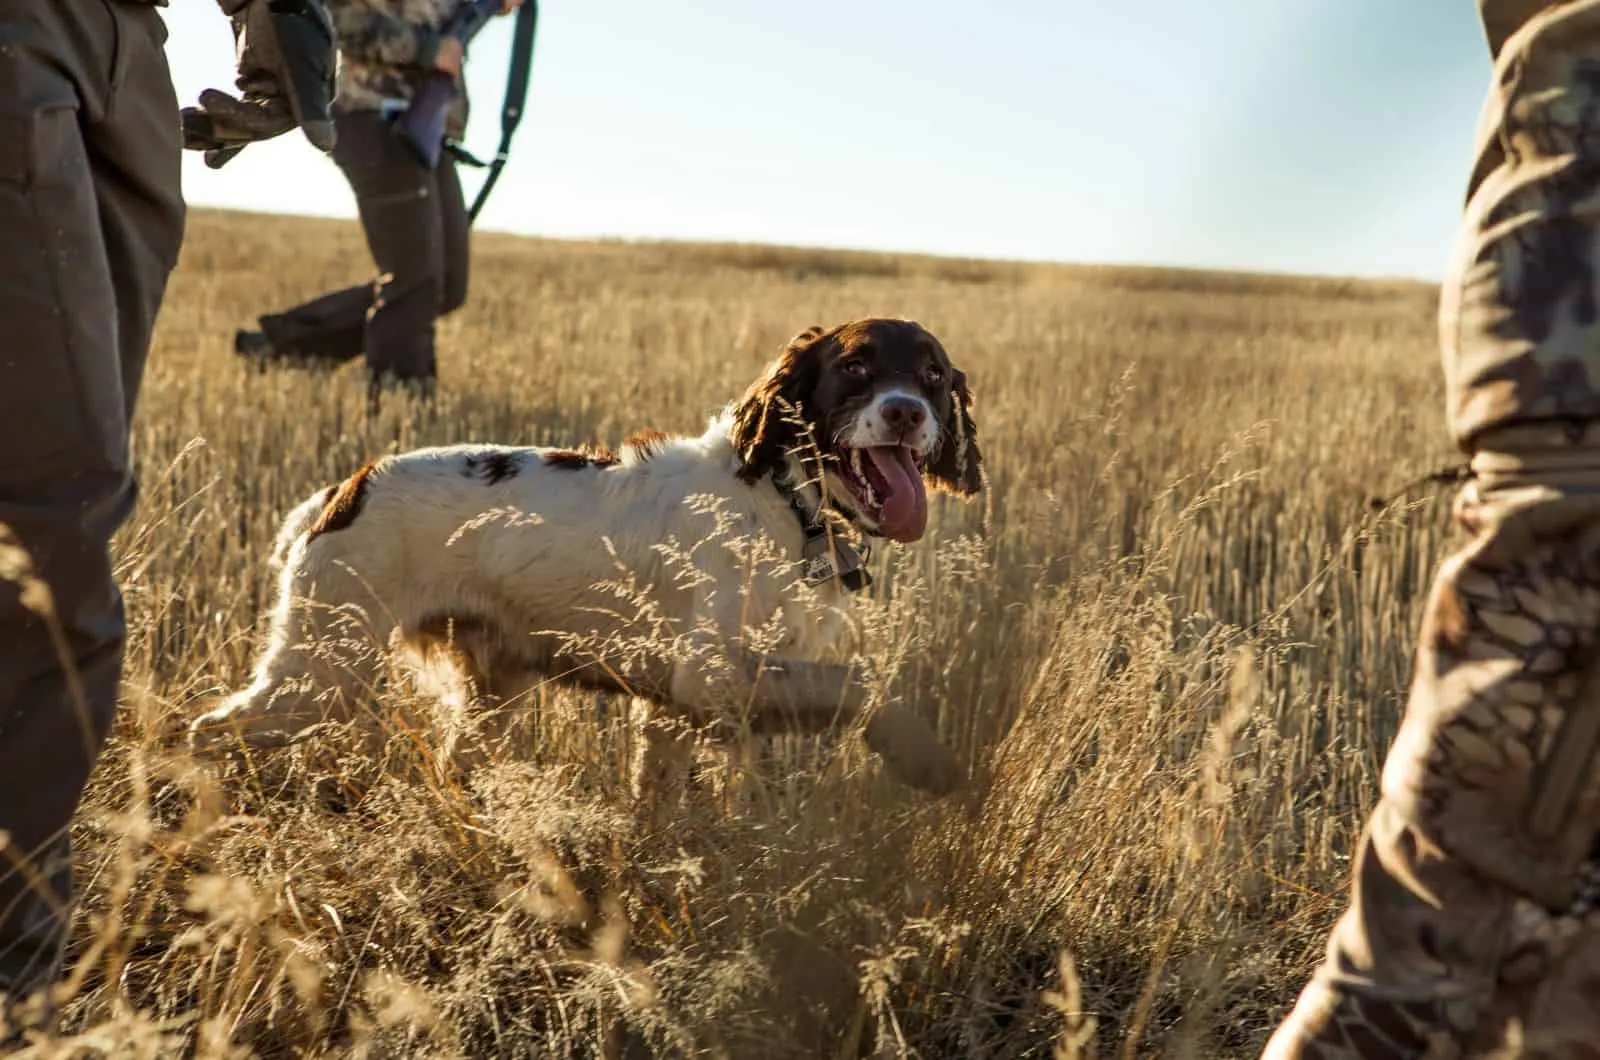 hunting dog in a field